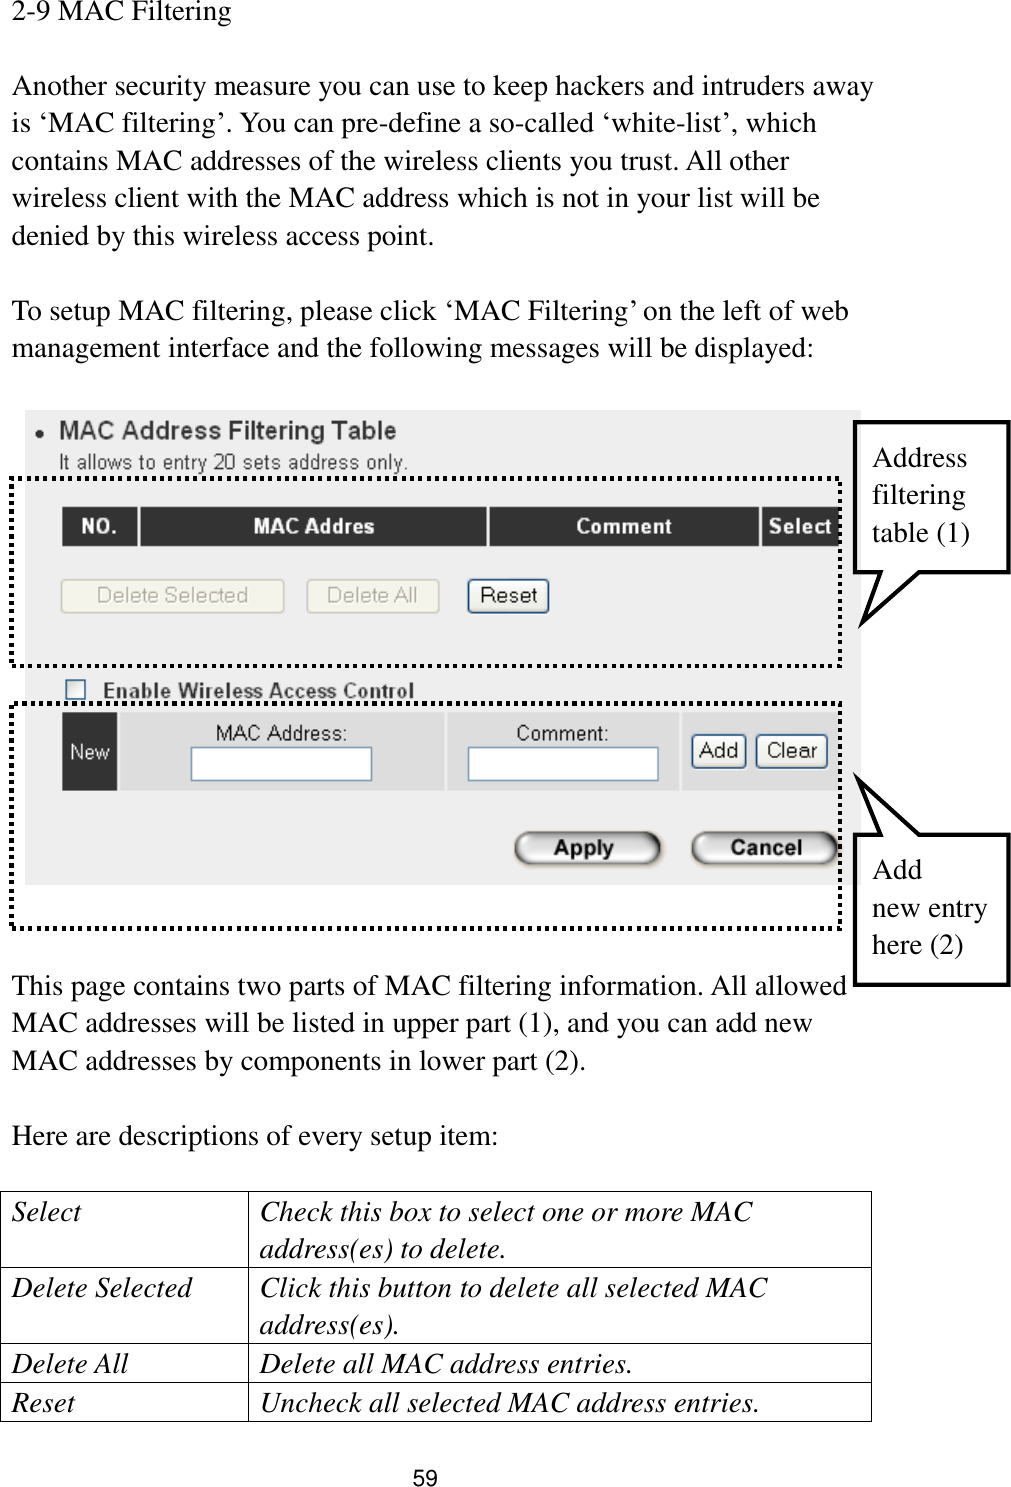 59 2-9 MAC Filtering  Another security measure you can use to keep hackers and intruders away is „MAC filtering‟. You can pre-define a so-called „white-list‟, which contains MAC addresses of the wireless clients you trust. All other wireless client with the MAC address which is not in your list will be denied by this wireless access point.  To setup MAC filtering, please click „MAC Filtering‟ on the left of web management interface and the following messages will be displayed:       This page contains two parts of MAC filtering information. All allowed MAC addresses will be listed in upper part (1), and you can add new MAC addresses by components in lower part (2).  Here are descriptions of every setup item:  Select Check this box to select one or more MAC address(es) to delete. Delete Selected Click this button to delete all selected MAC address(es). Delete All Delete all MAC address entries. Reset Uncheck all selected MAC address entries. Address filtering   table (1) Add   new entry here (2) 